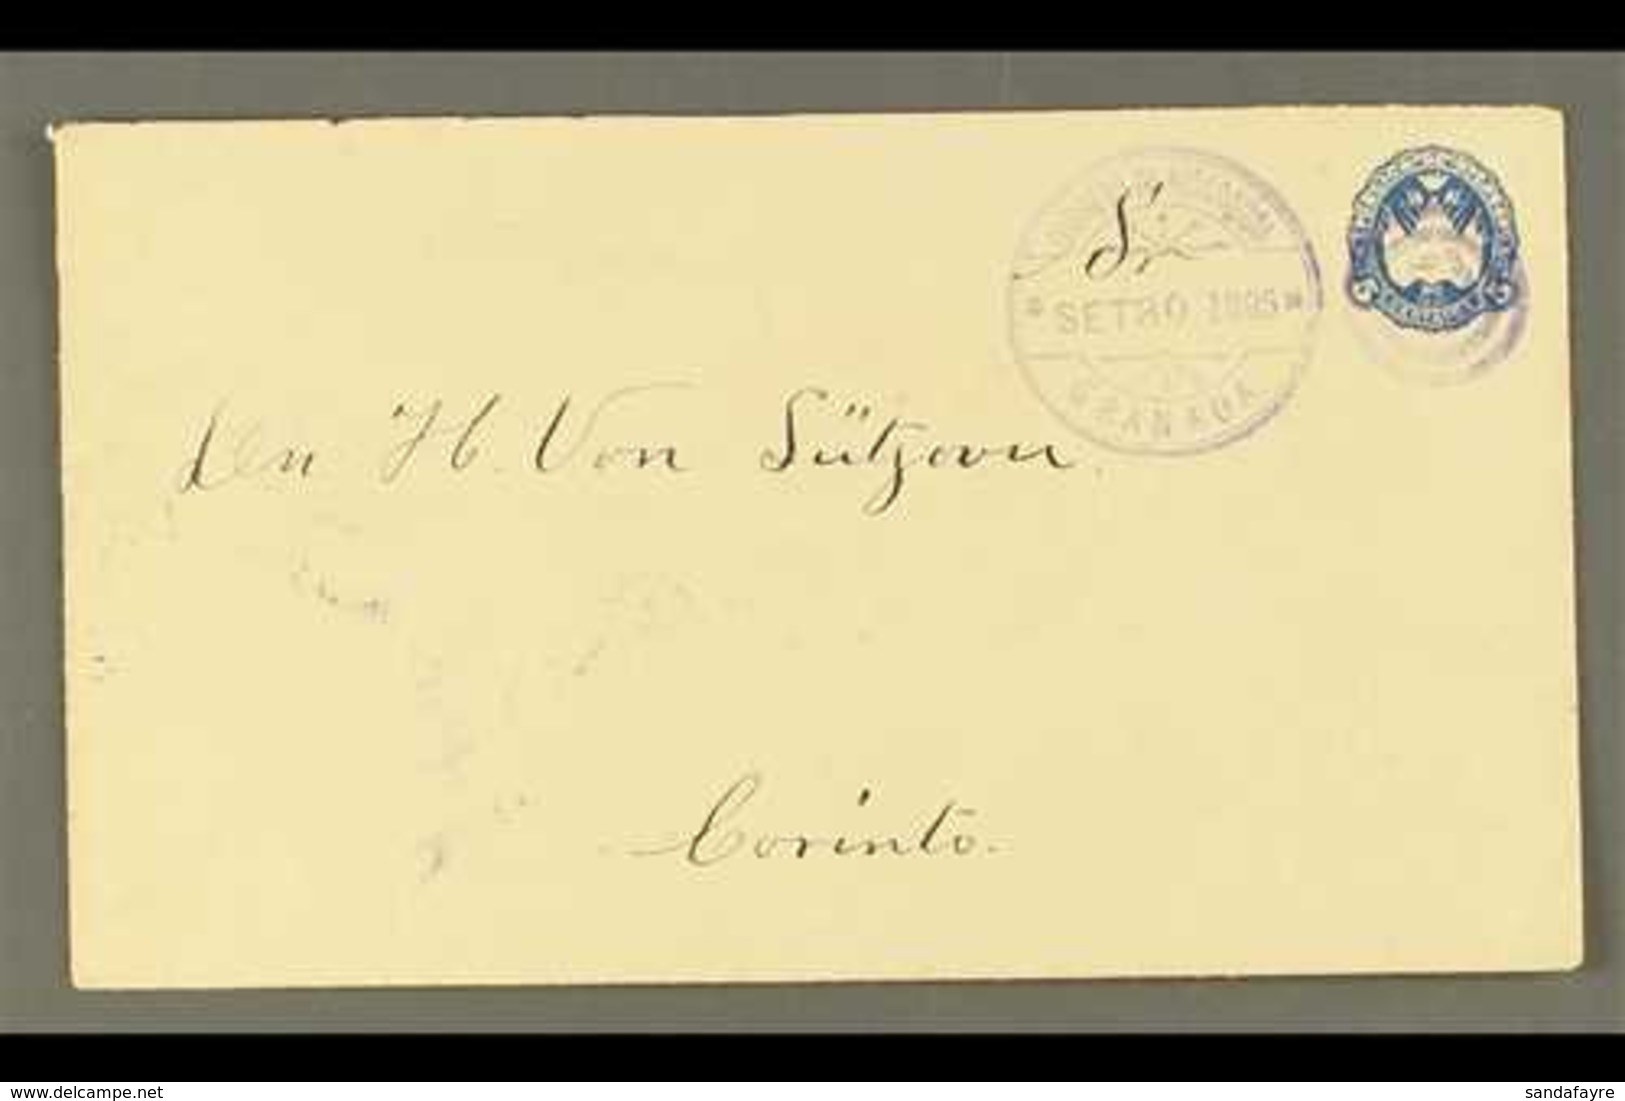 POSTAL STATIONERY  1895 5c Blue, Envelope, H&G 29, Very Fine, Commercially Used With "GRANADA / SET 30 1895" Cancel, Sim - Nicaragua